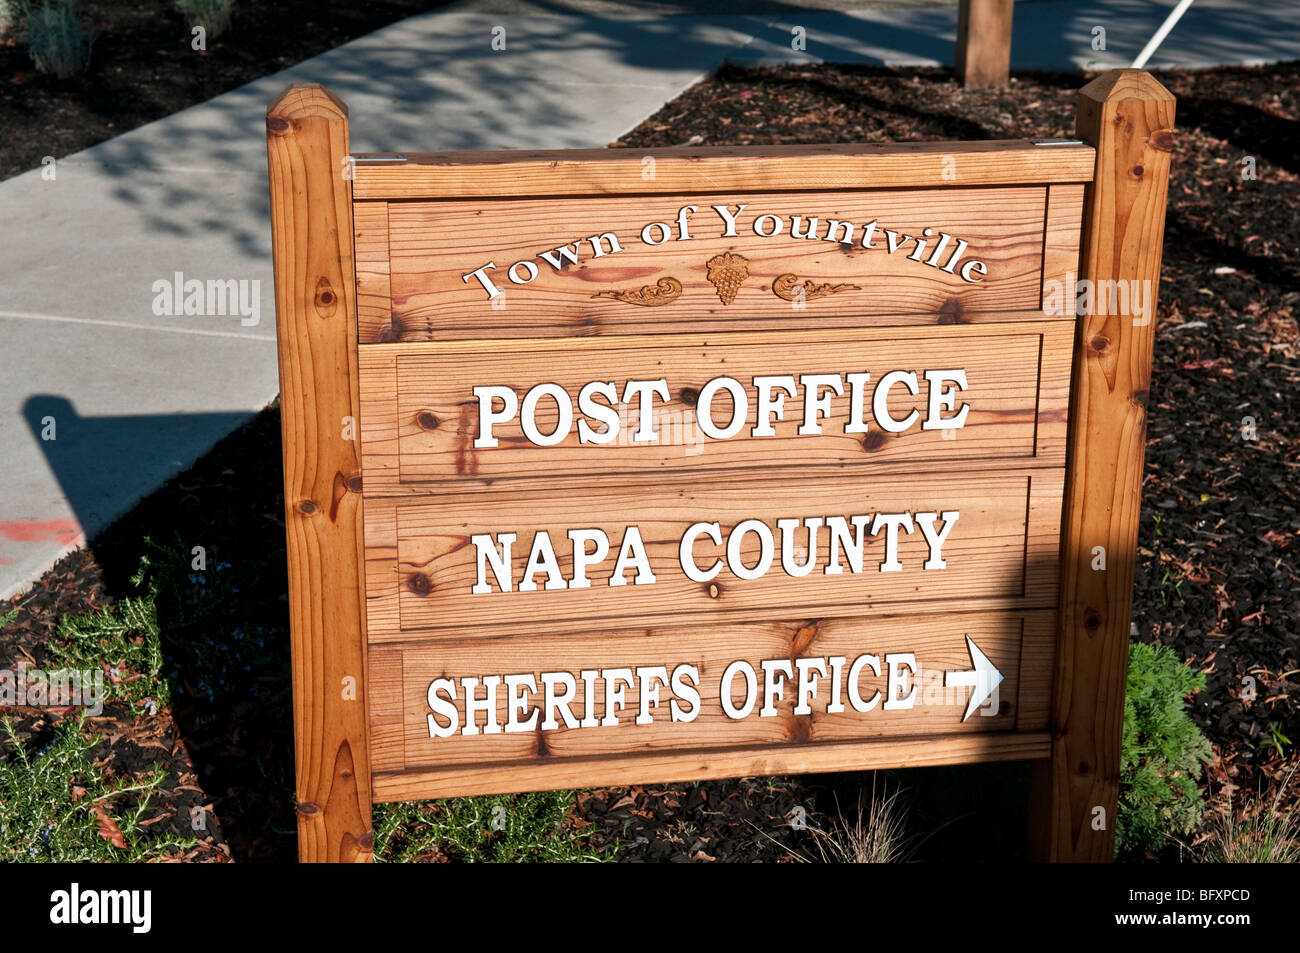 Yountville California sign for Post Office and Napa County Sheriffs Office Stock Photo